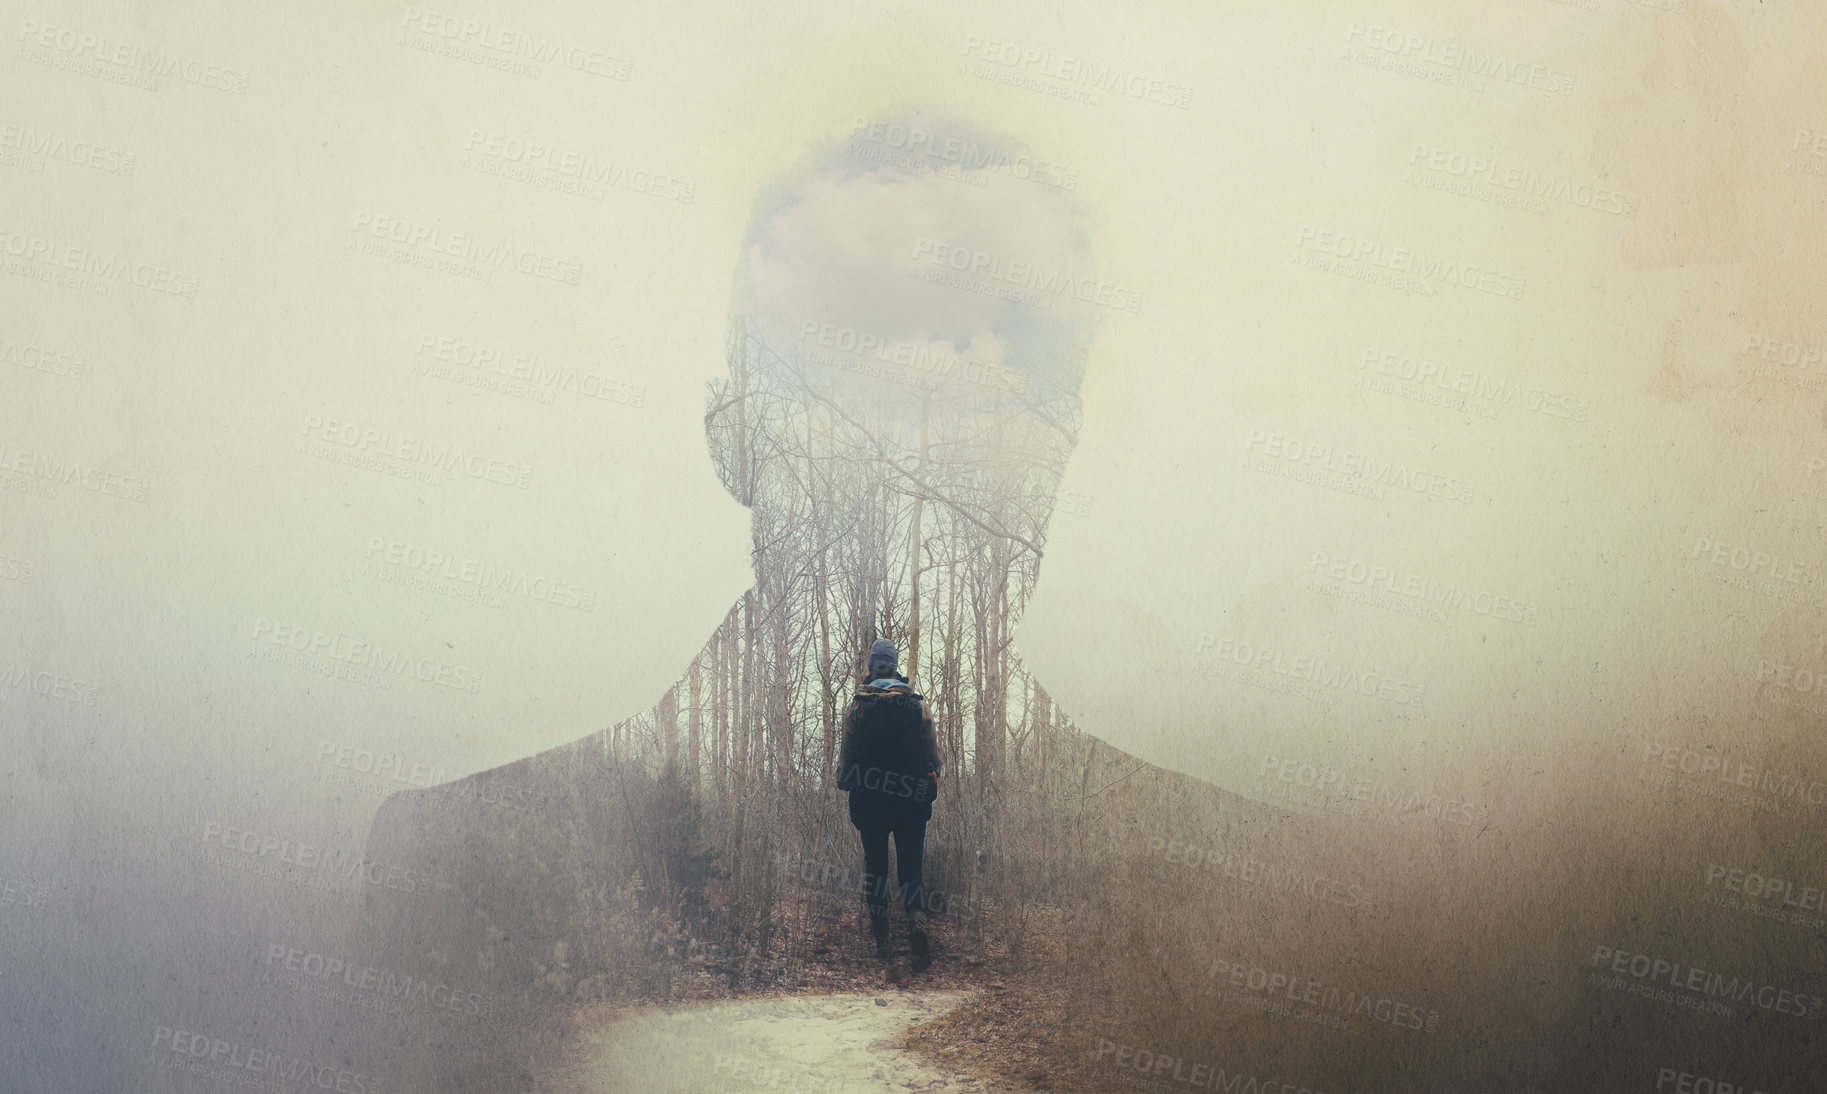 Buy stock photo Composite image of a man's silhouette superimposed on a woman alone in the woods